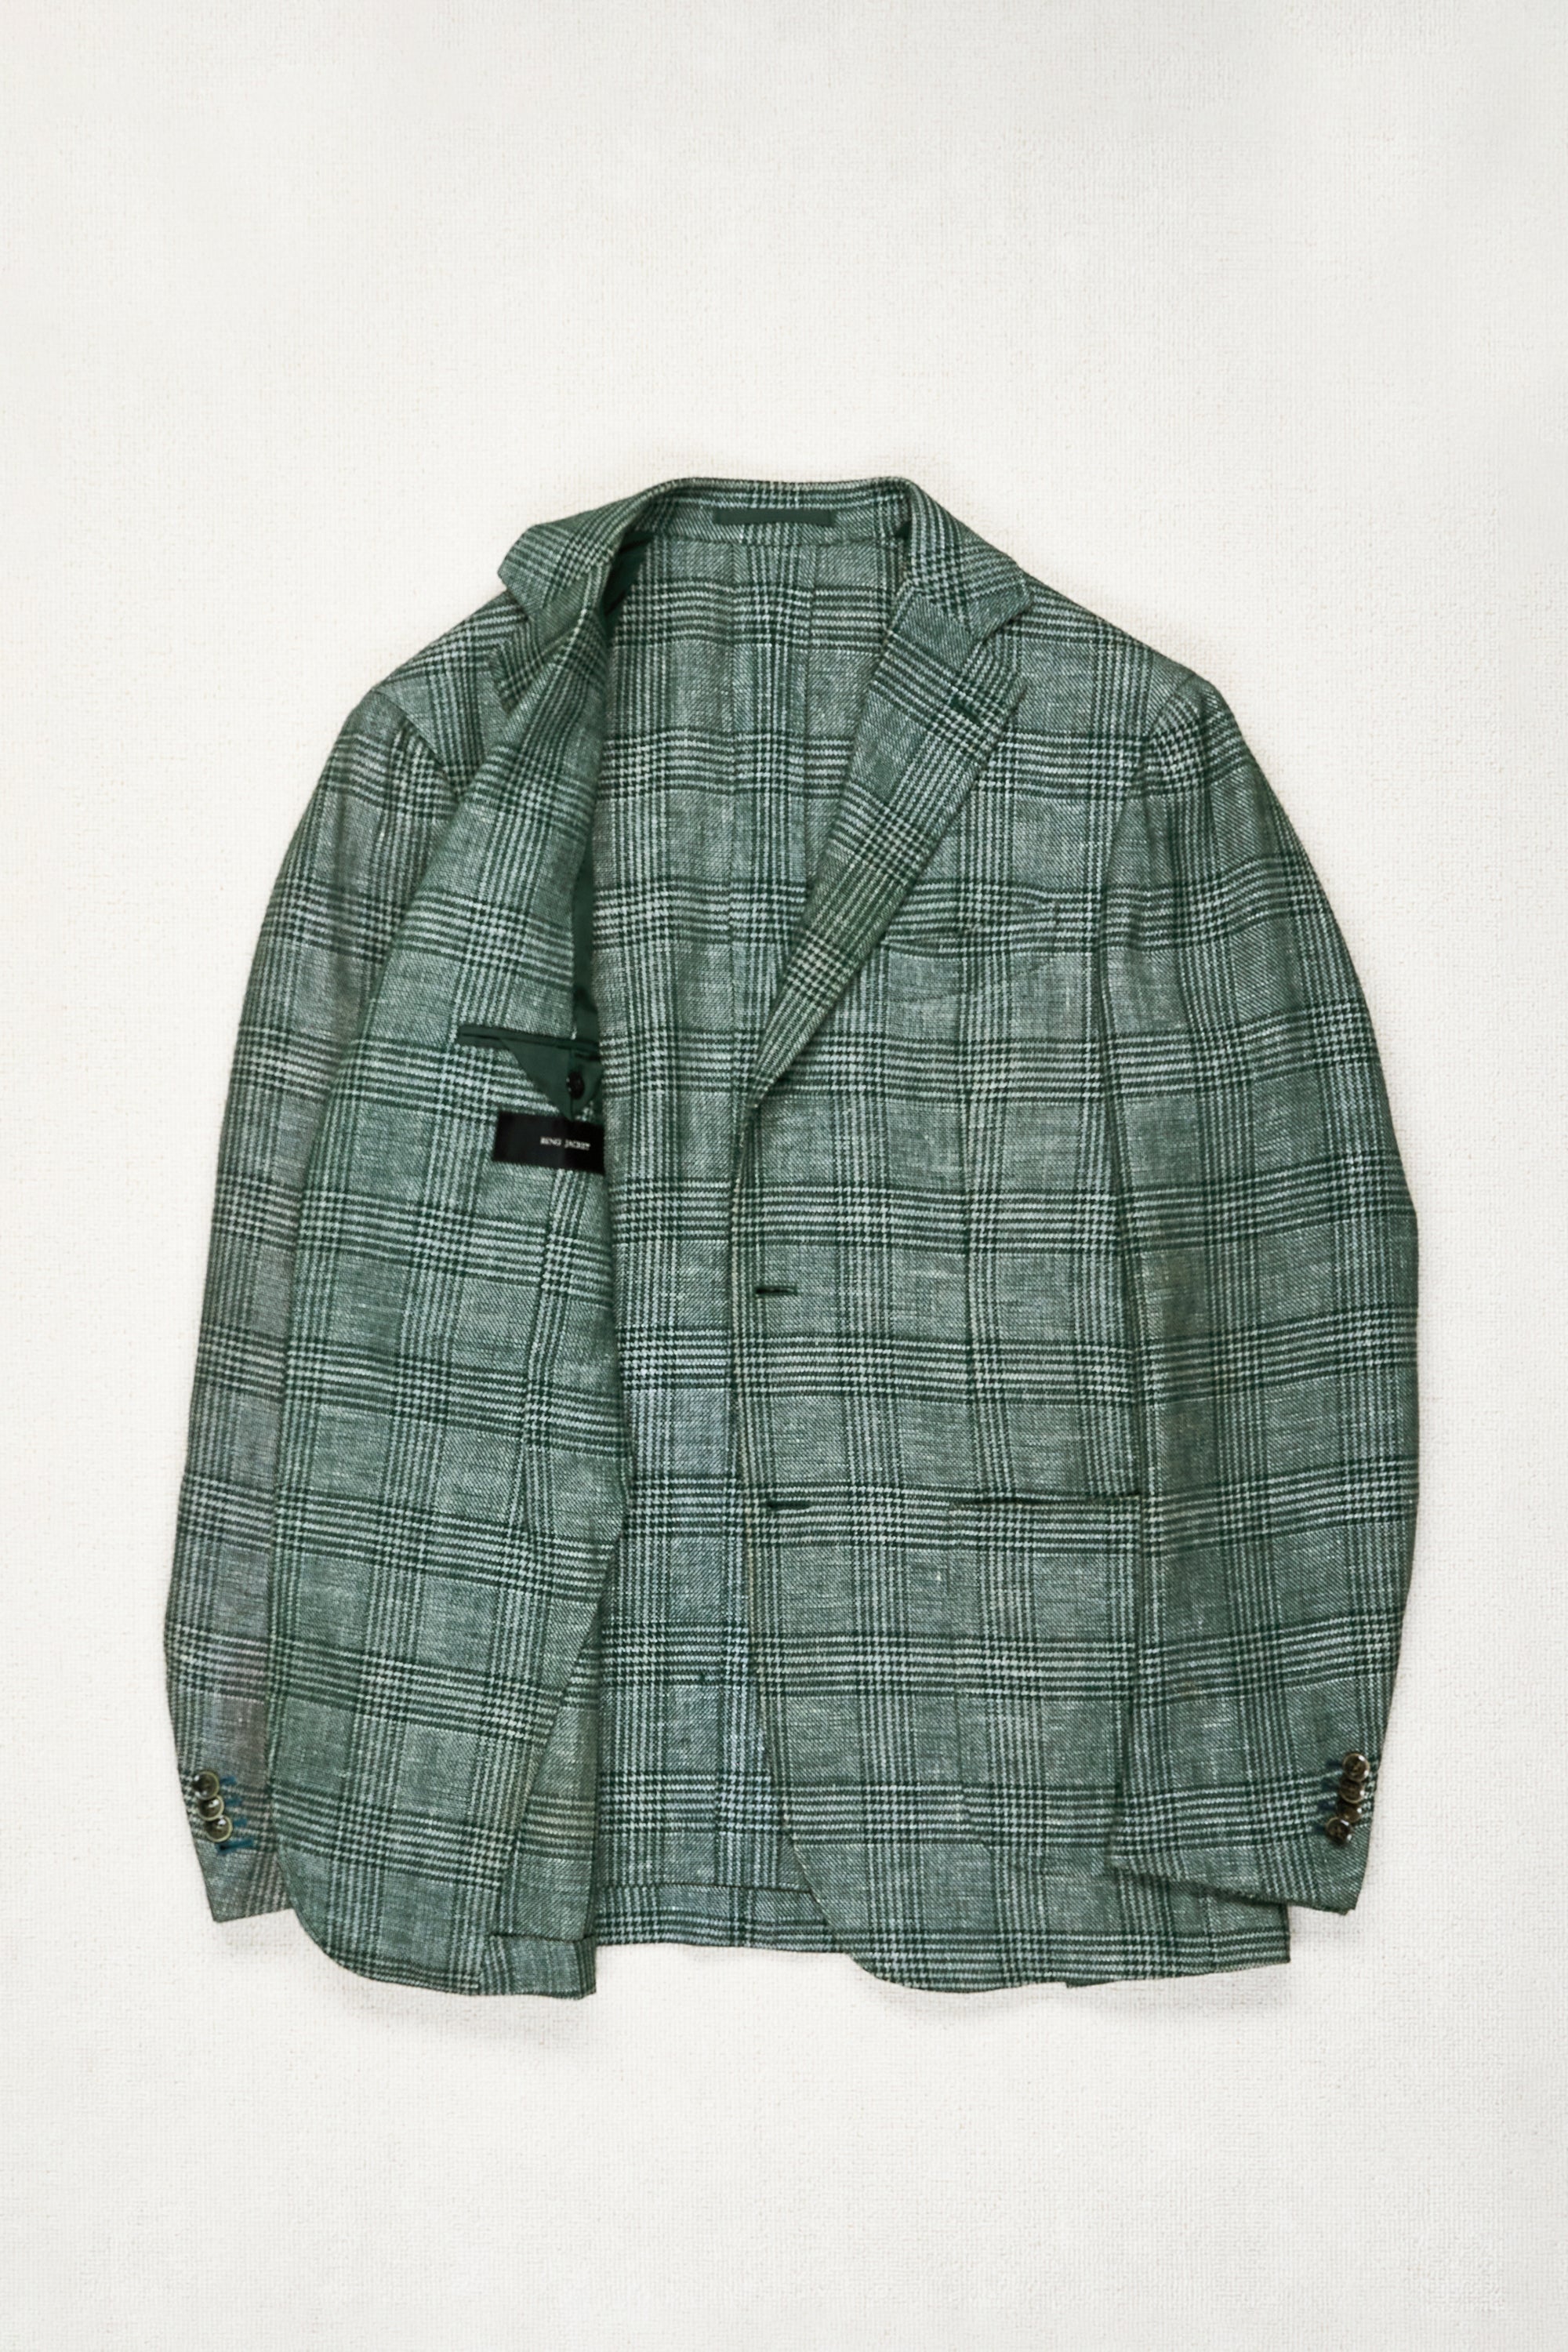 Ring Jacket Green Prince of Wales Check Wool/Linen/Silk/Cashmere Sport Coat